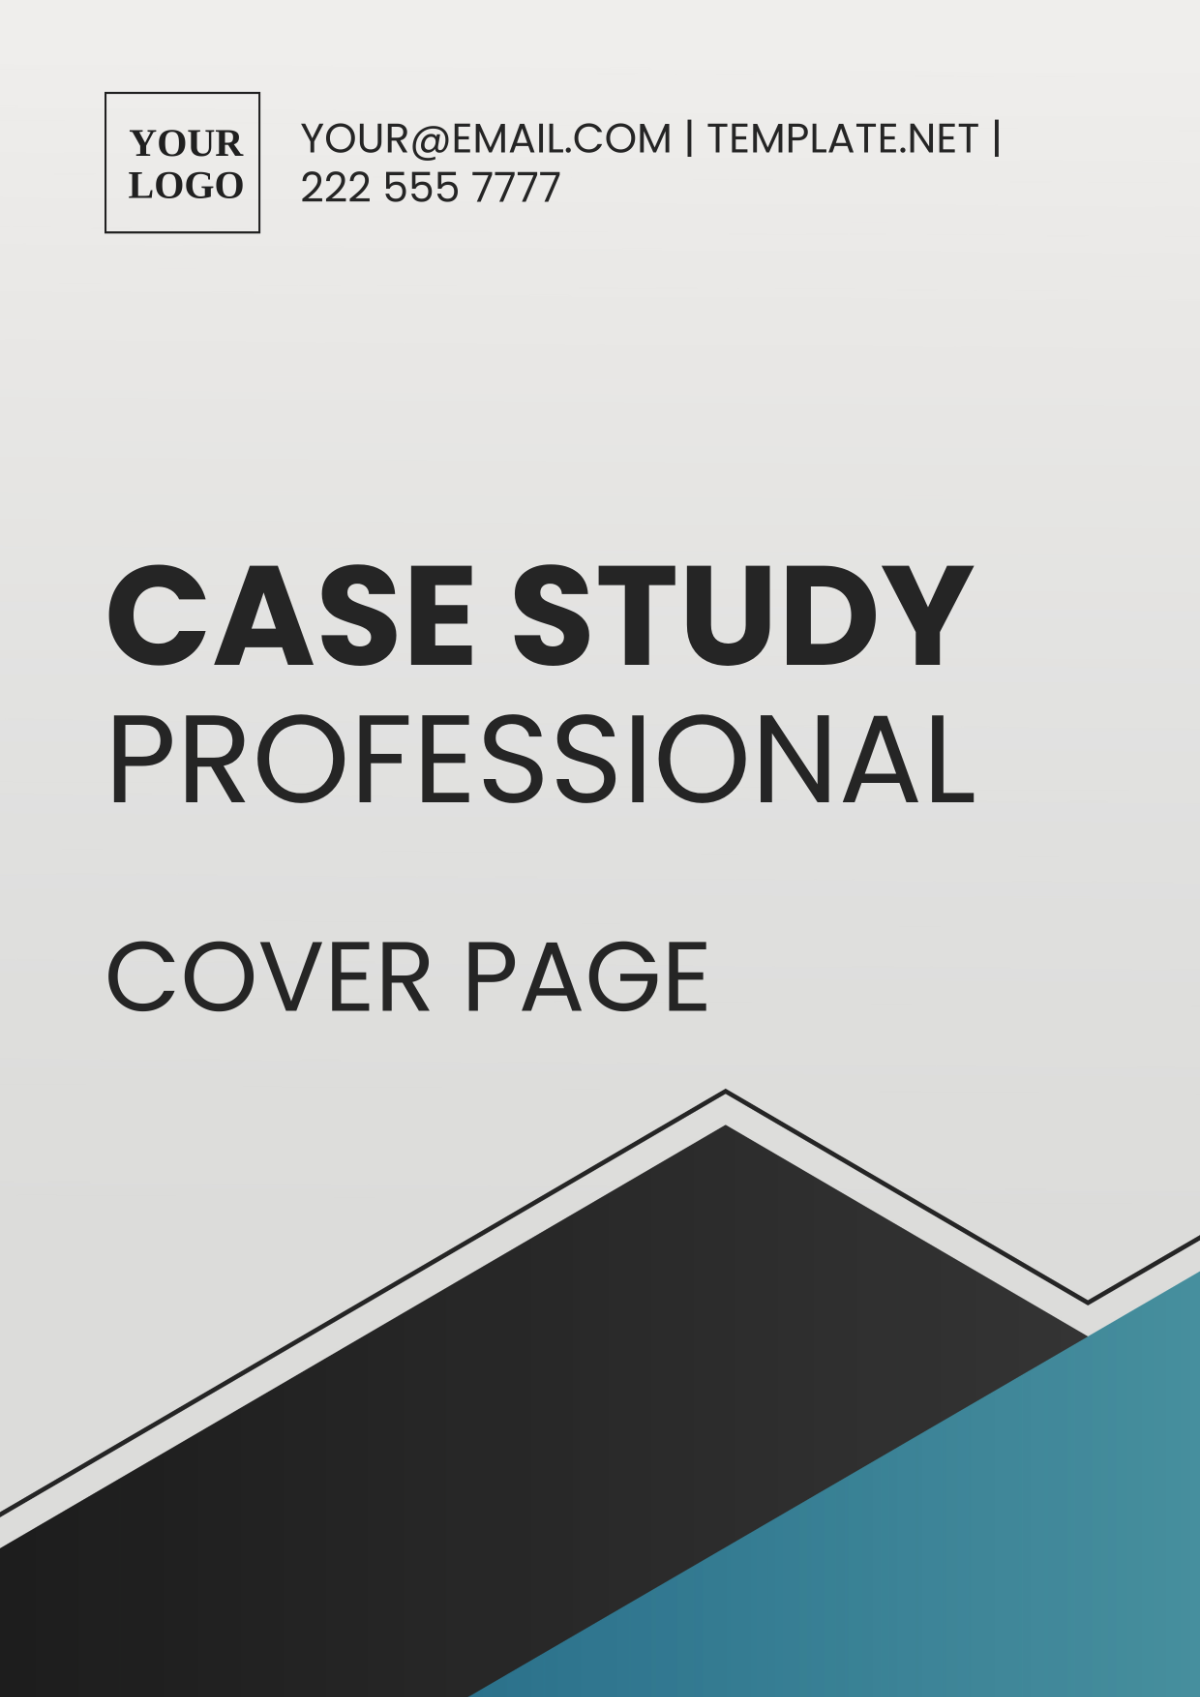 Case Study Professional Cover Page